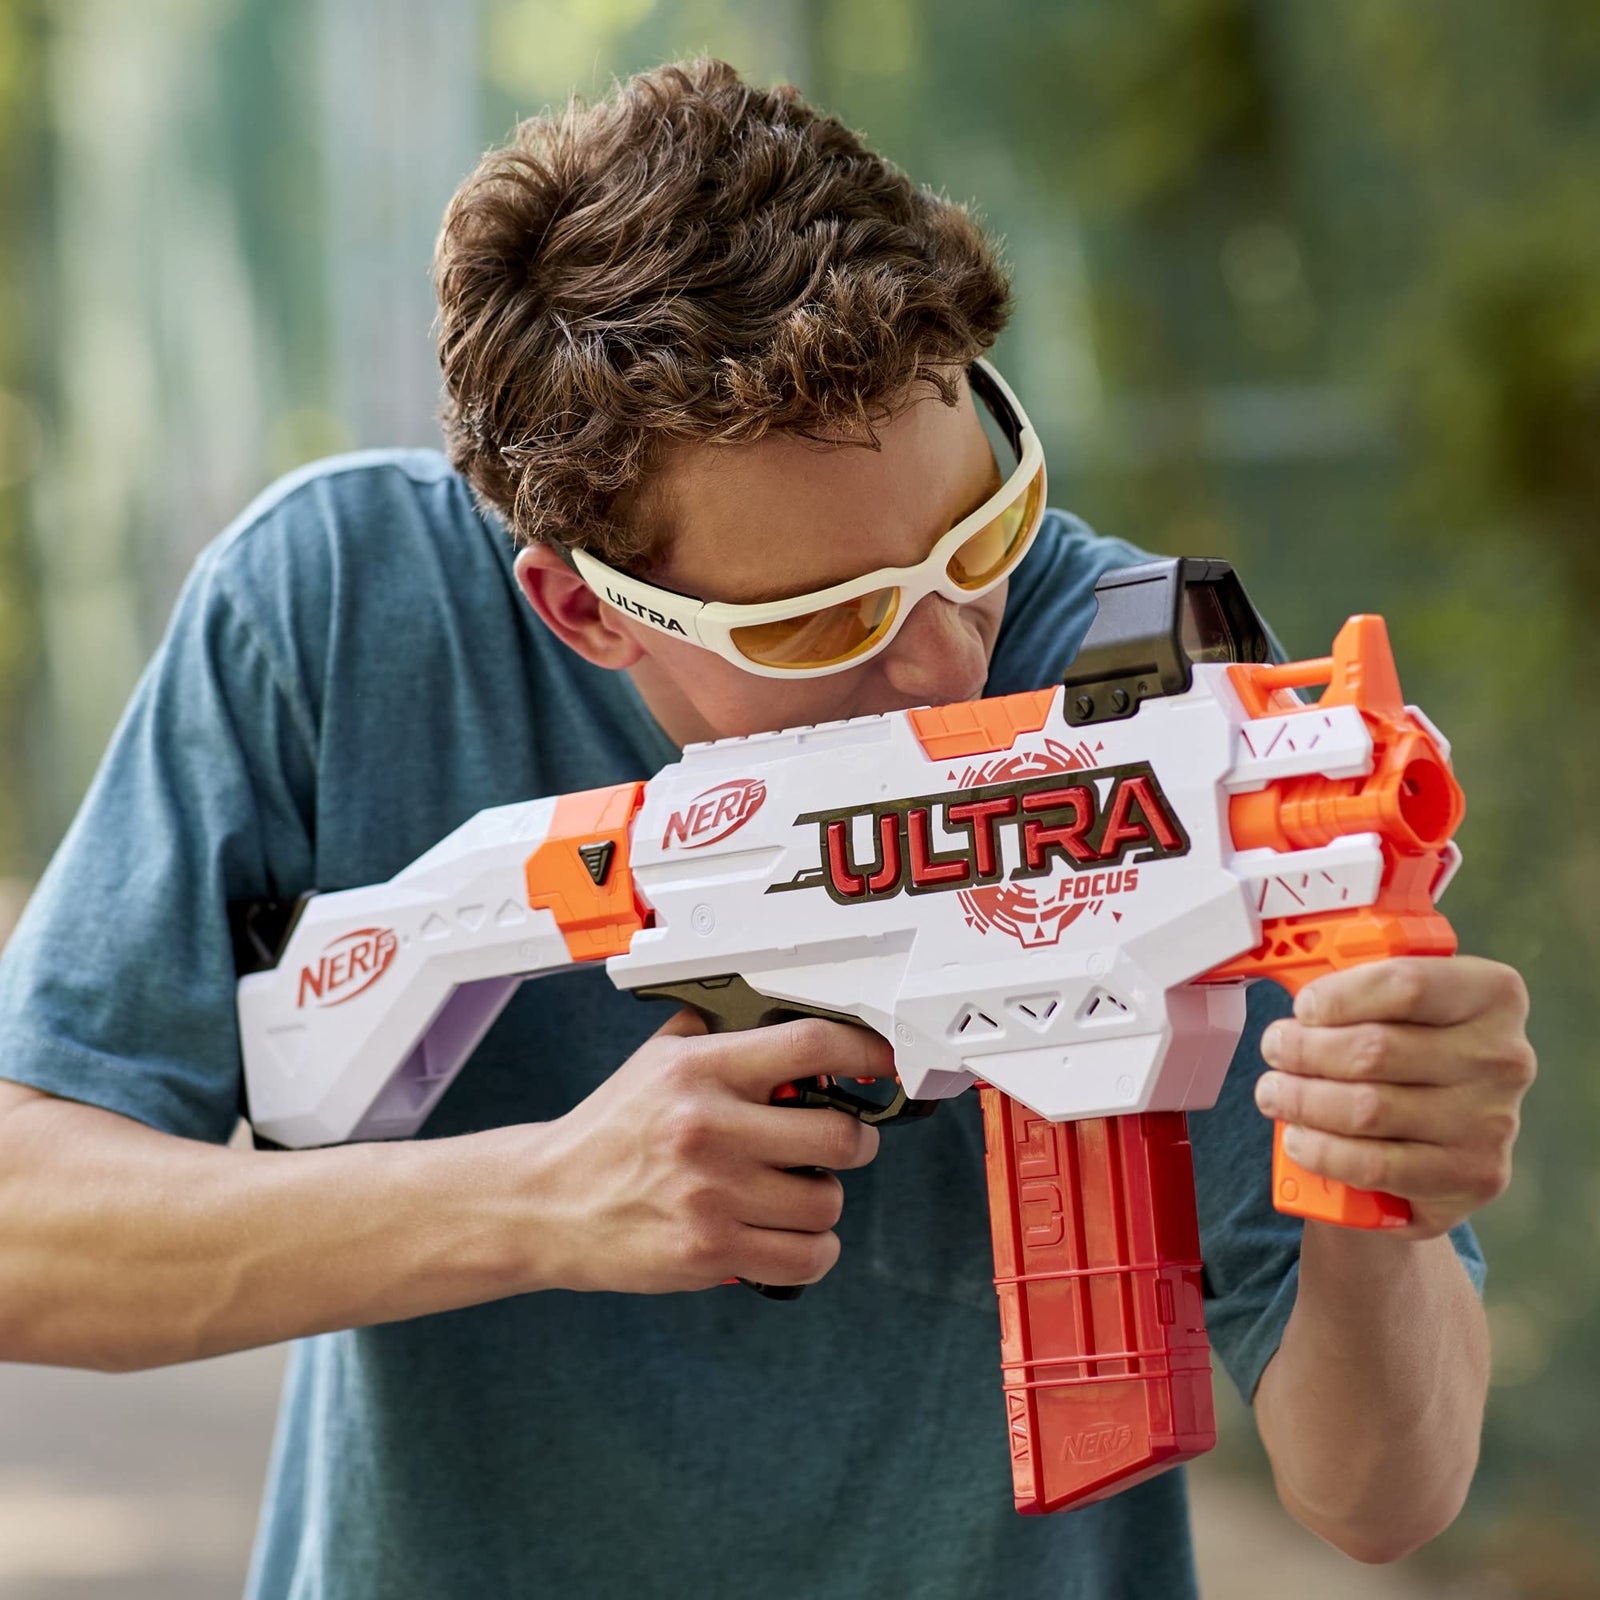 NERF Ultra Focus Motorized Blaster, 10-Dart Clip, 10 AccuStrike Ultra Darts, Stock, Compatible Only Ultra Darts (Amazon Exclusive)